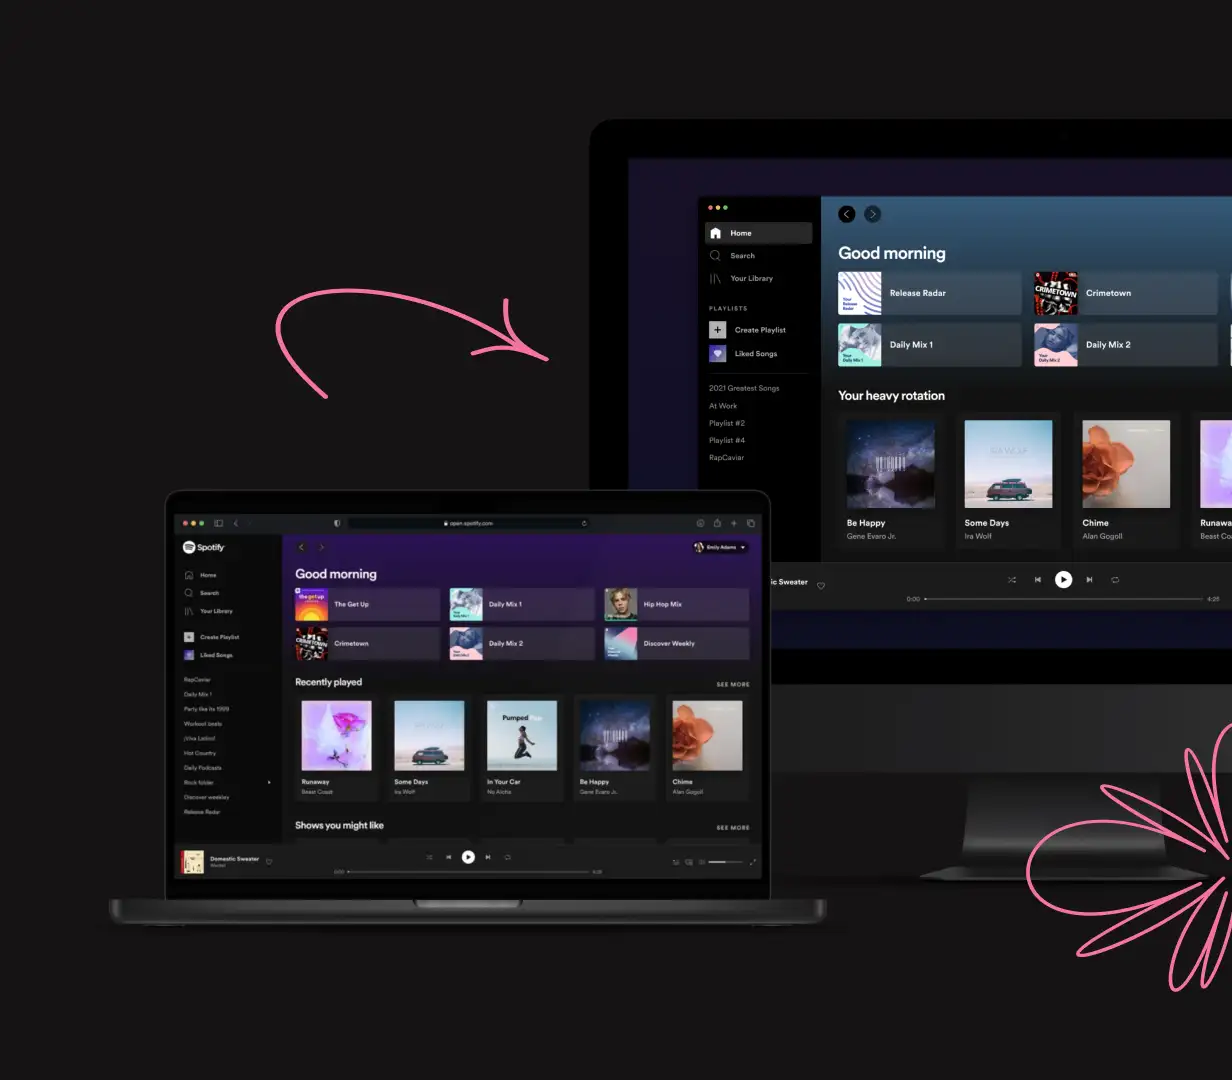 thumbnail image for Meeting the digital needs of internal customers at Spotify